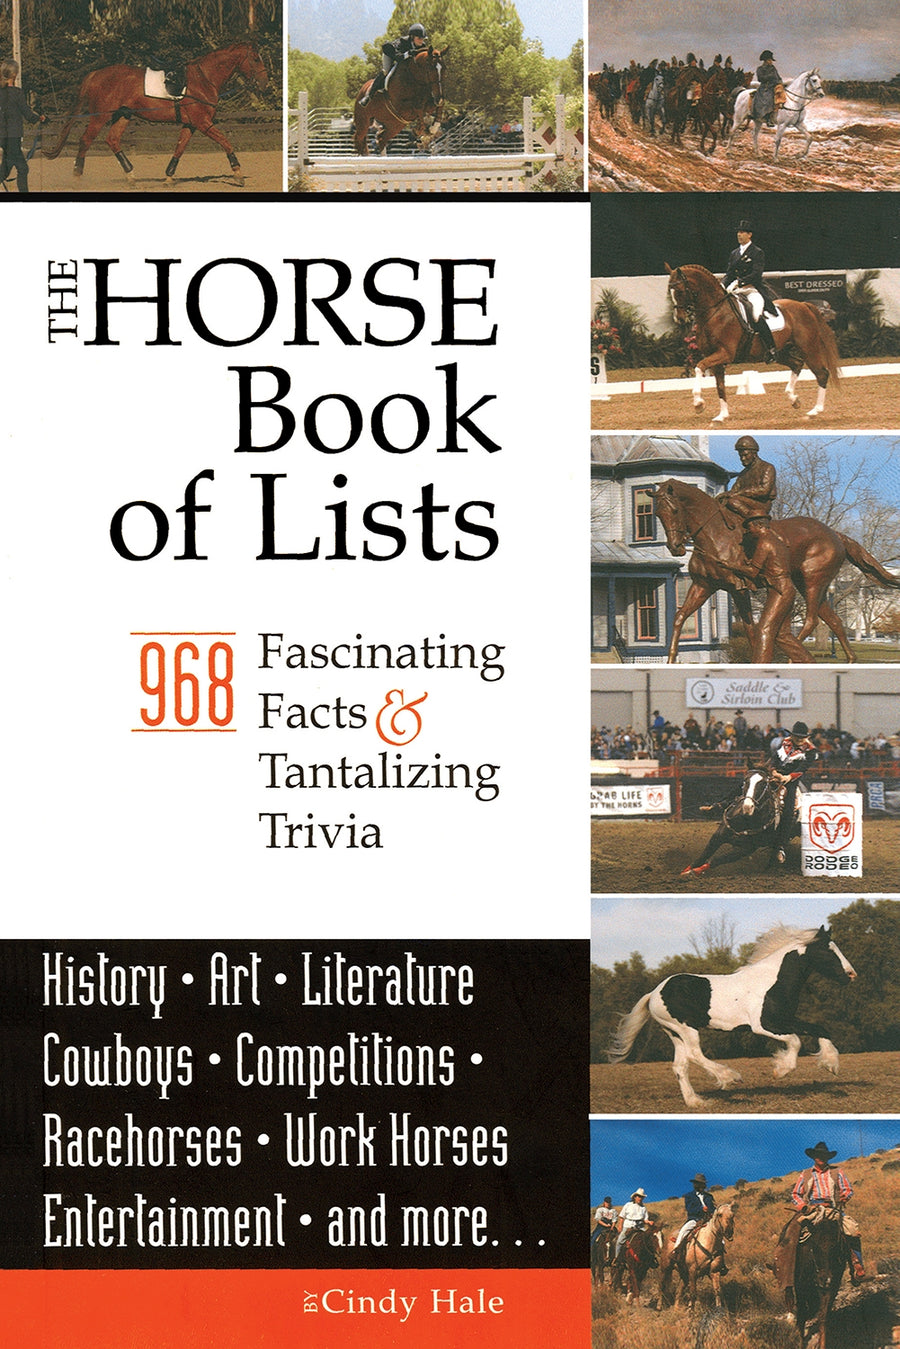 The Horse Book of Lists Paperback Publication: 2008/10/07